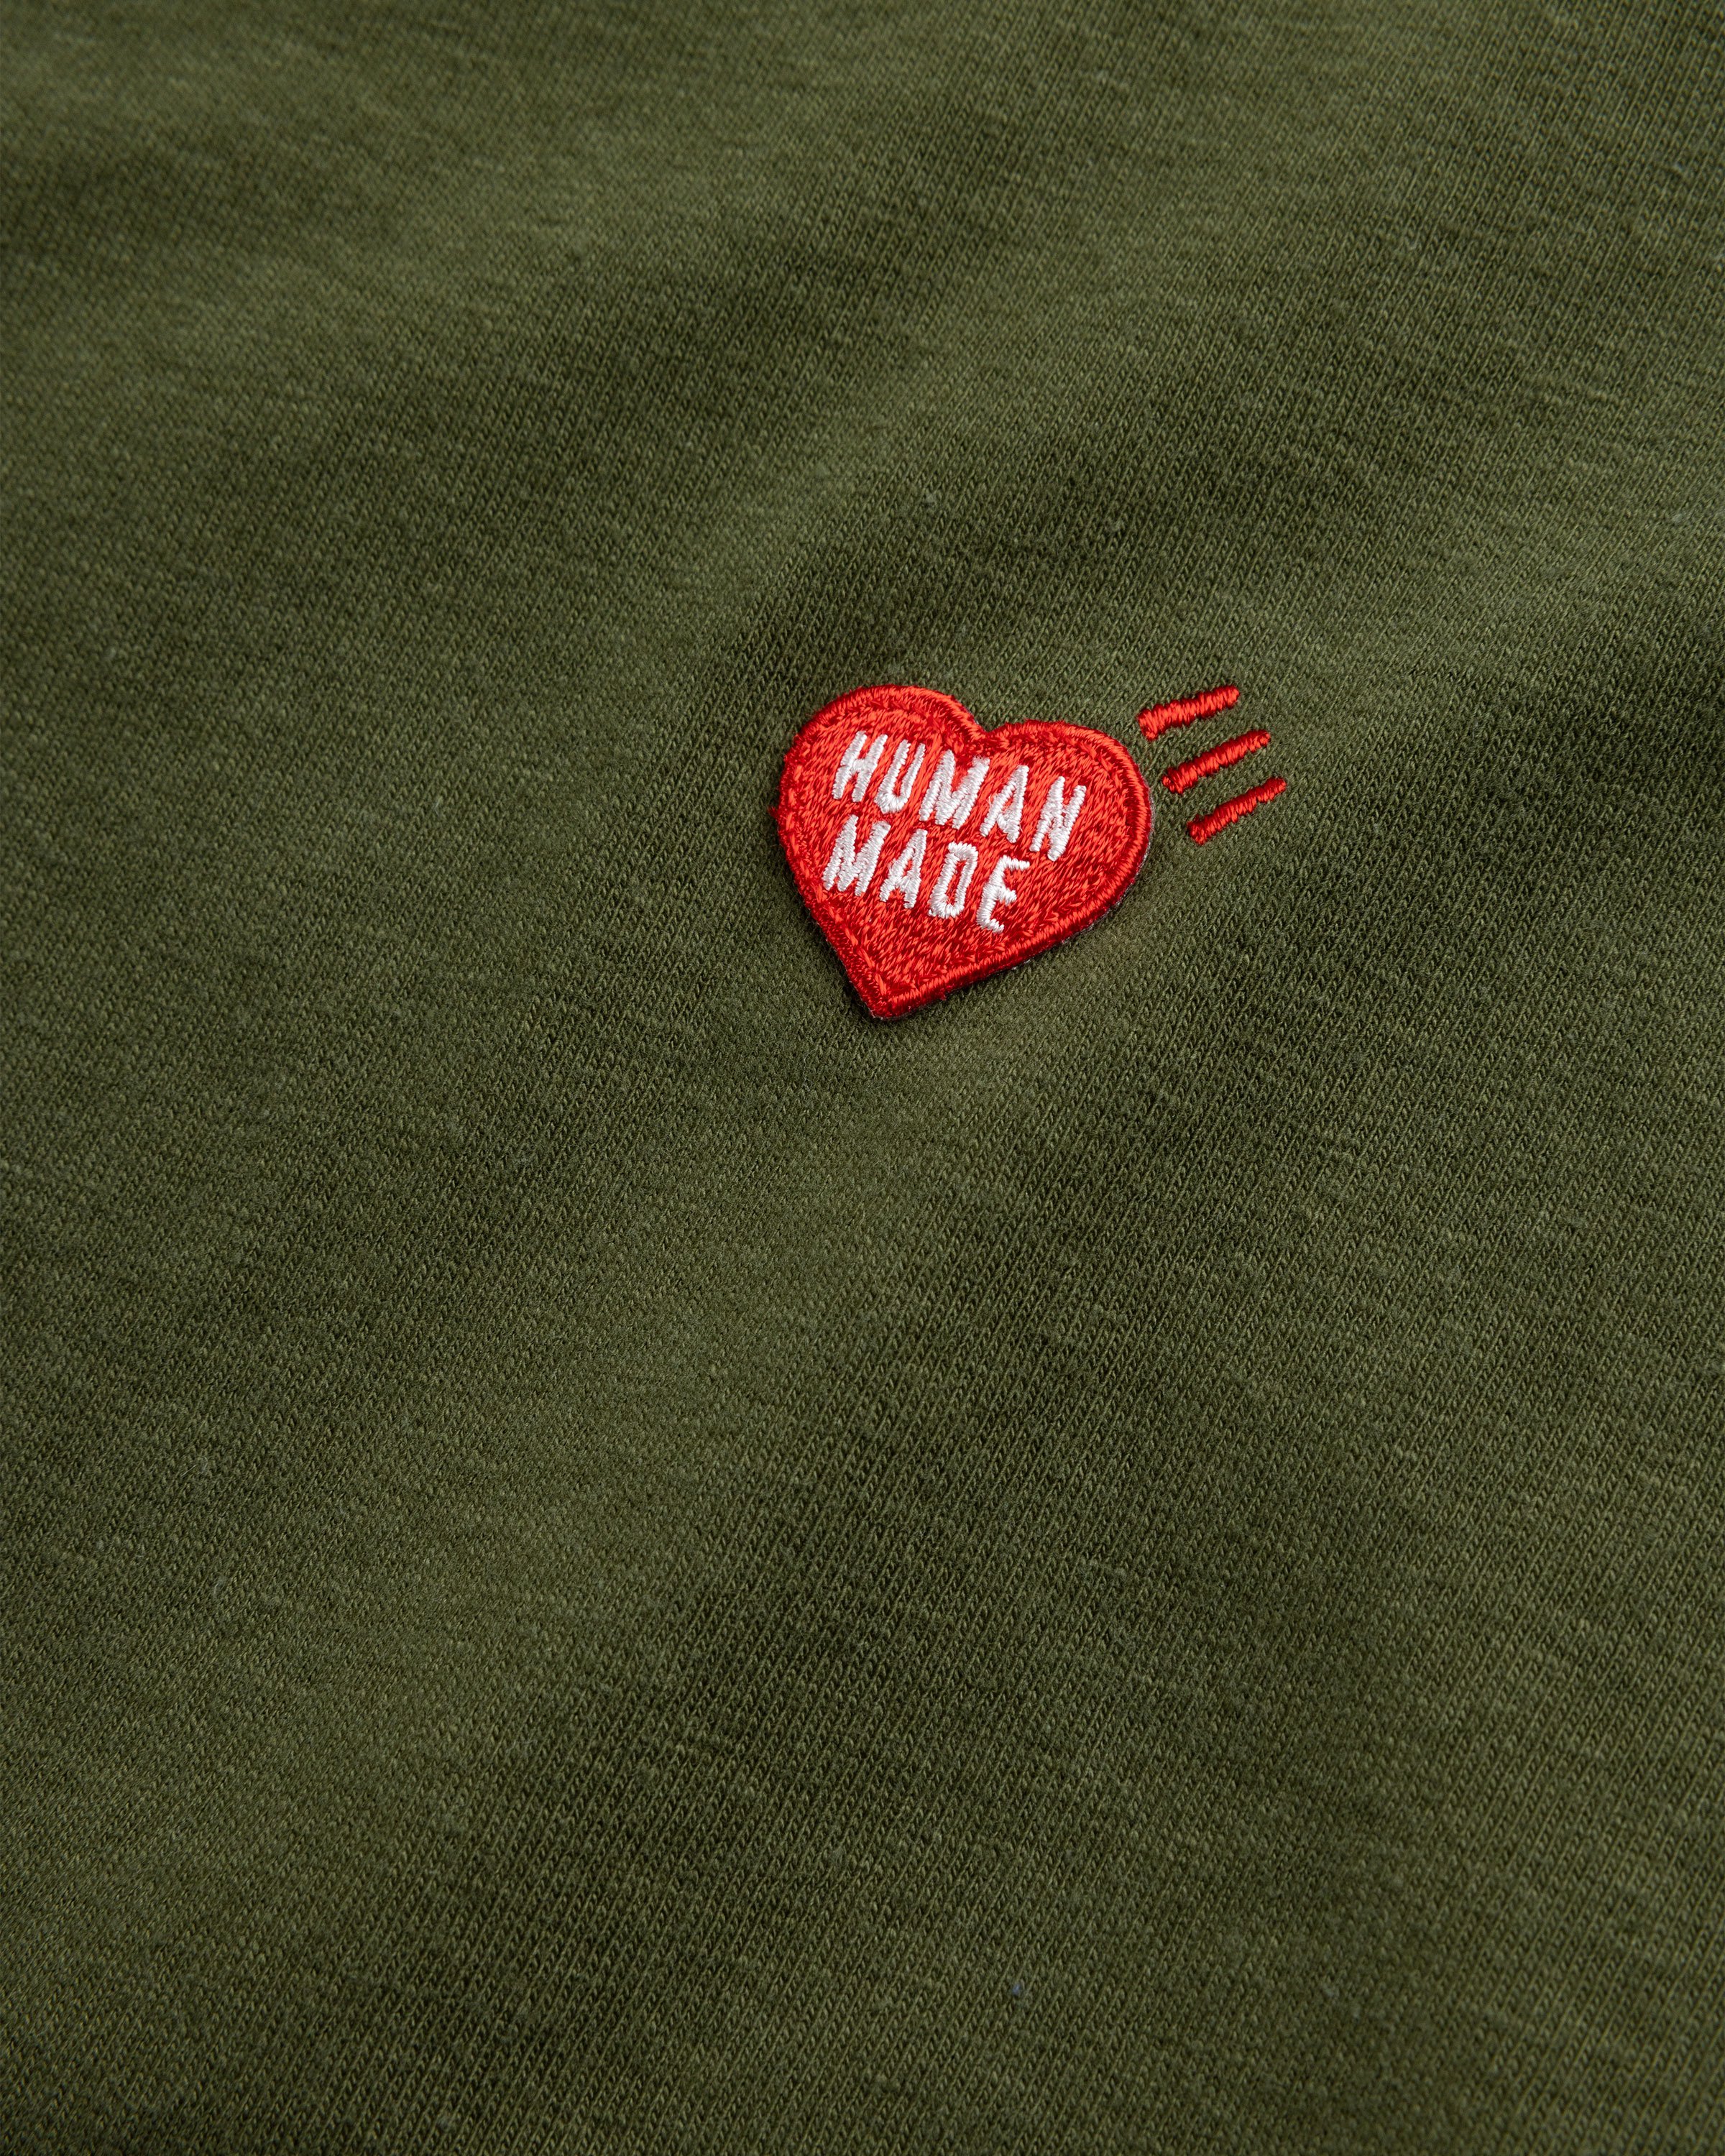 Human Made - GRAPHIC L/S T-SHIRT #1 Olive Drab - Clothing - Green - Image 6